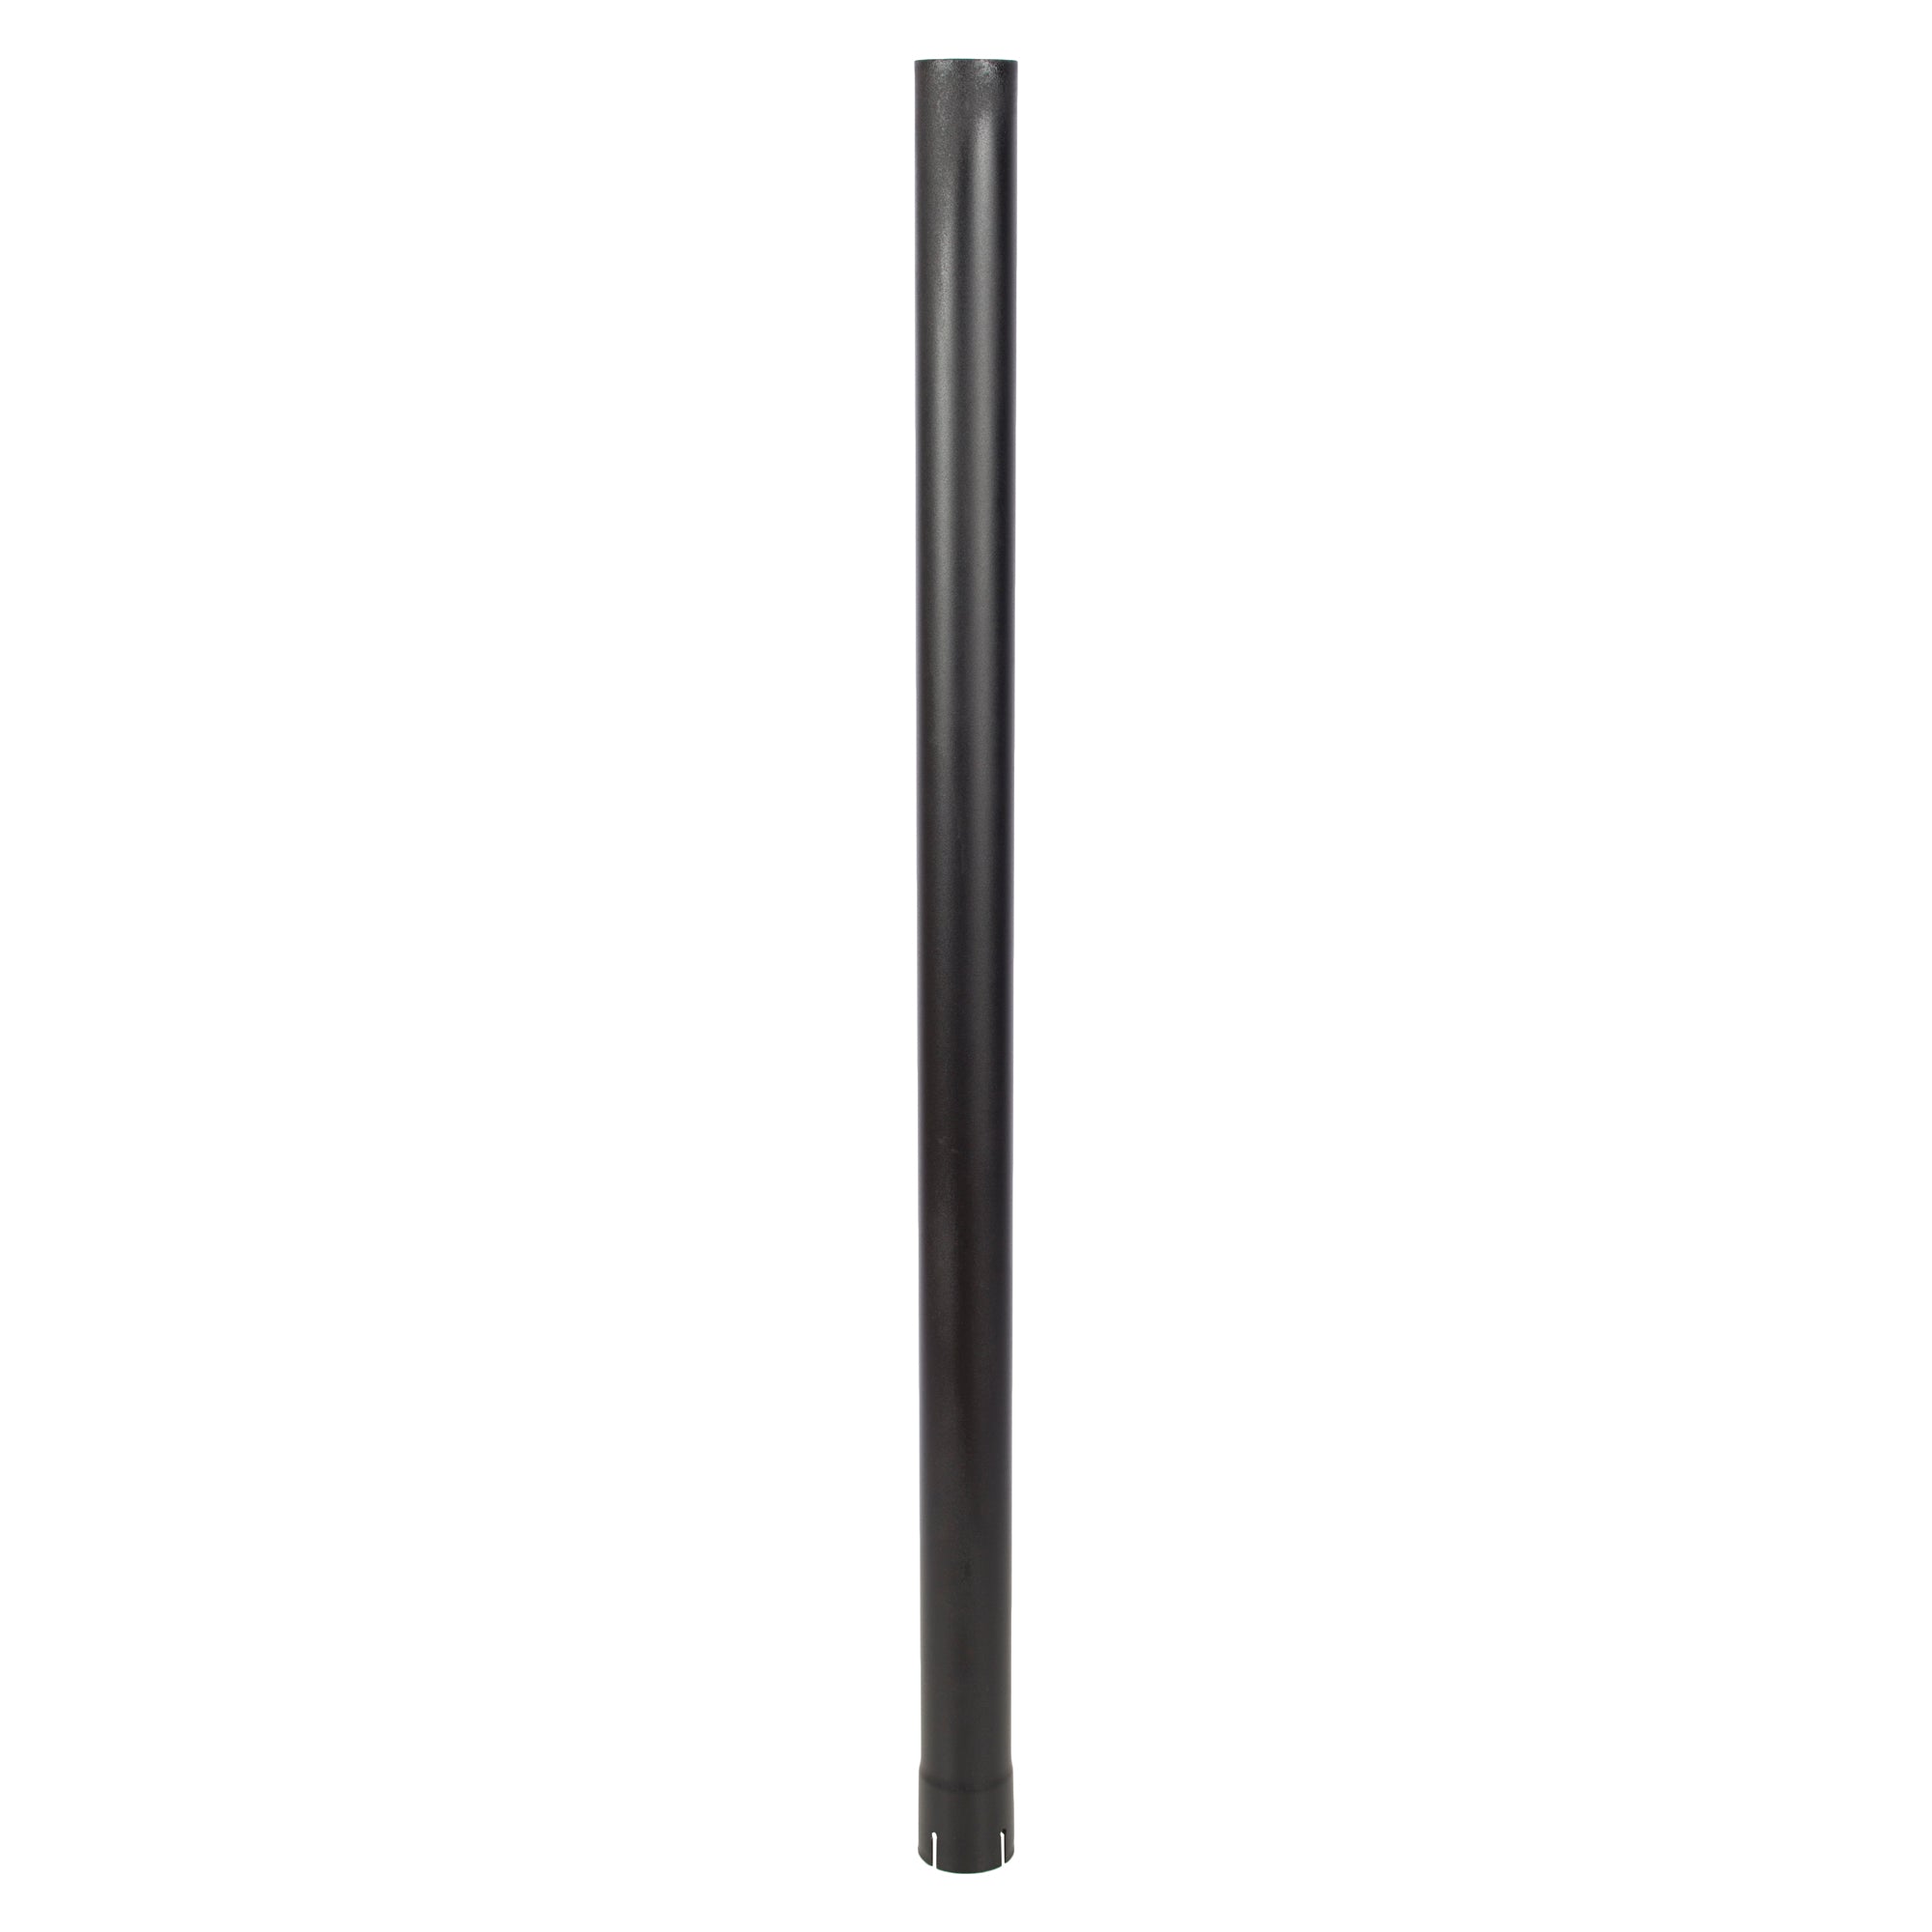 Exhaust Stack Pipe   2-1/2" x 48" Straight Black